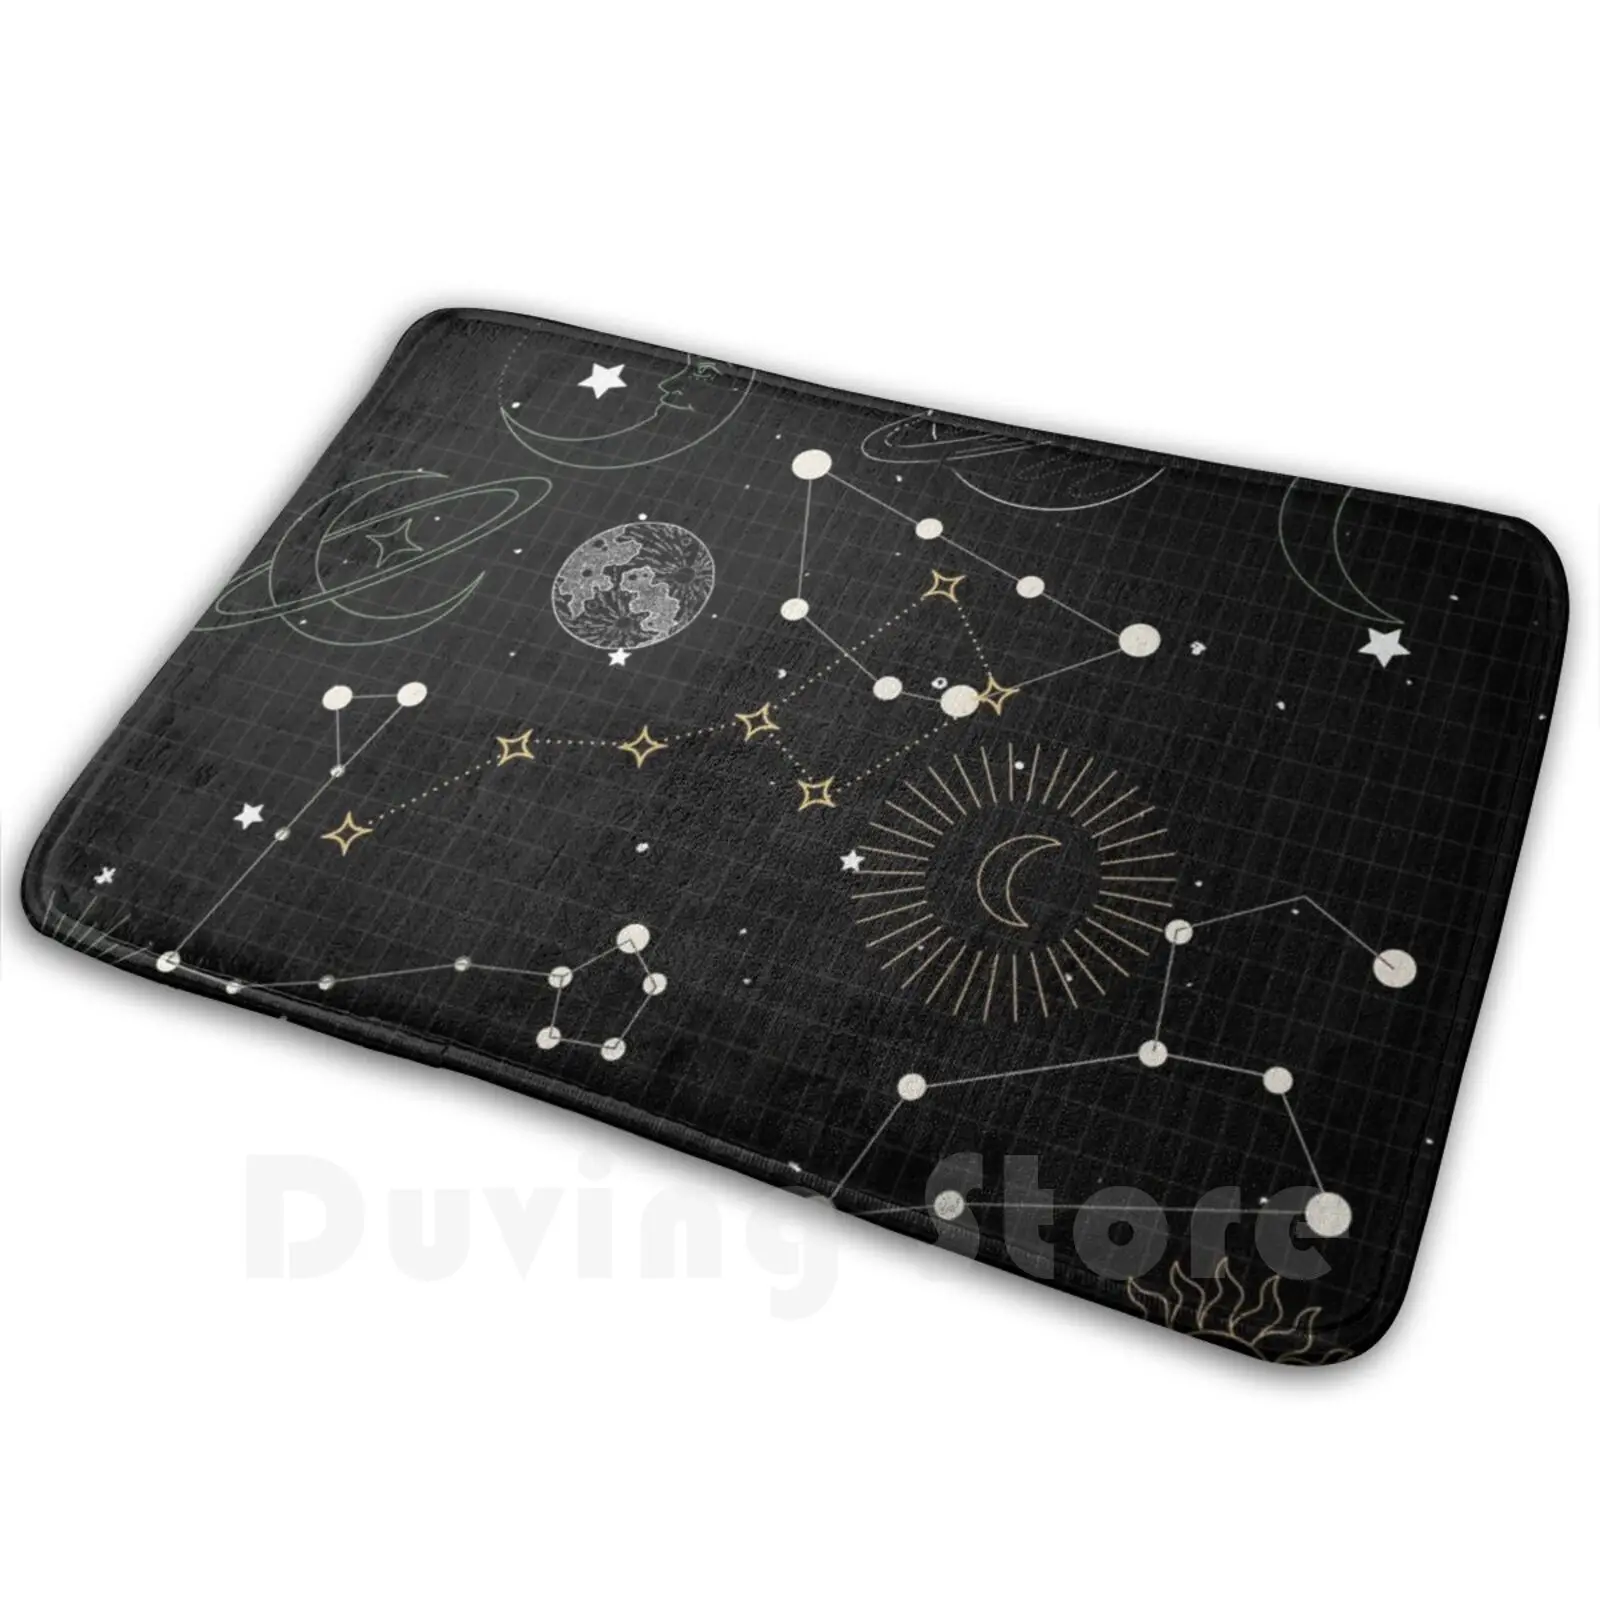 

Space Design ( Colour ) Carpet Mat Rug Cushion Soft Moon Space Stars Planets Black Goth Astrology Astronomy Spooky